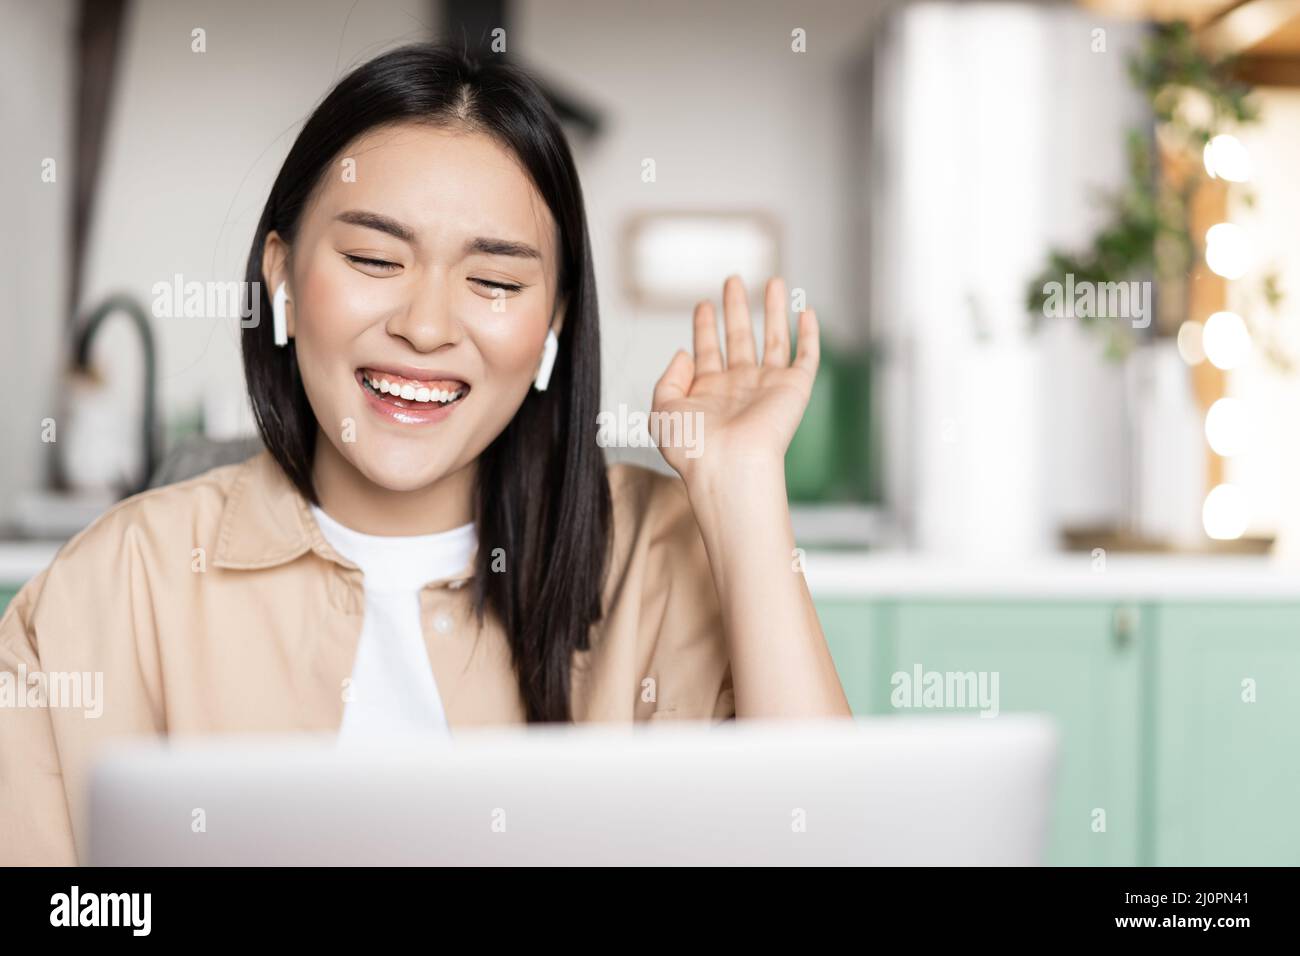 Happy asian woman laughing and smiling, talking on video call using laptop, waving hand and chuckling, wearing earbuds Stock Photo